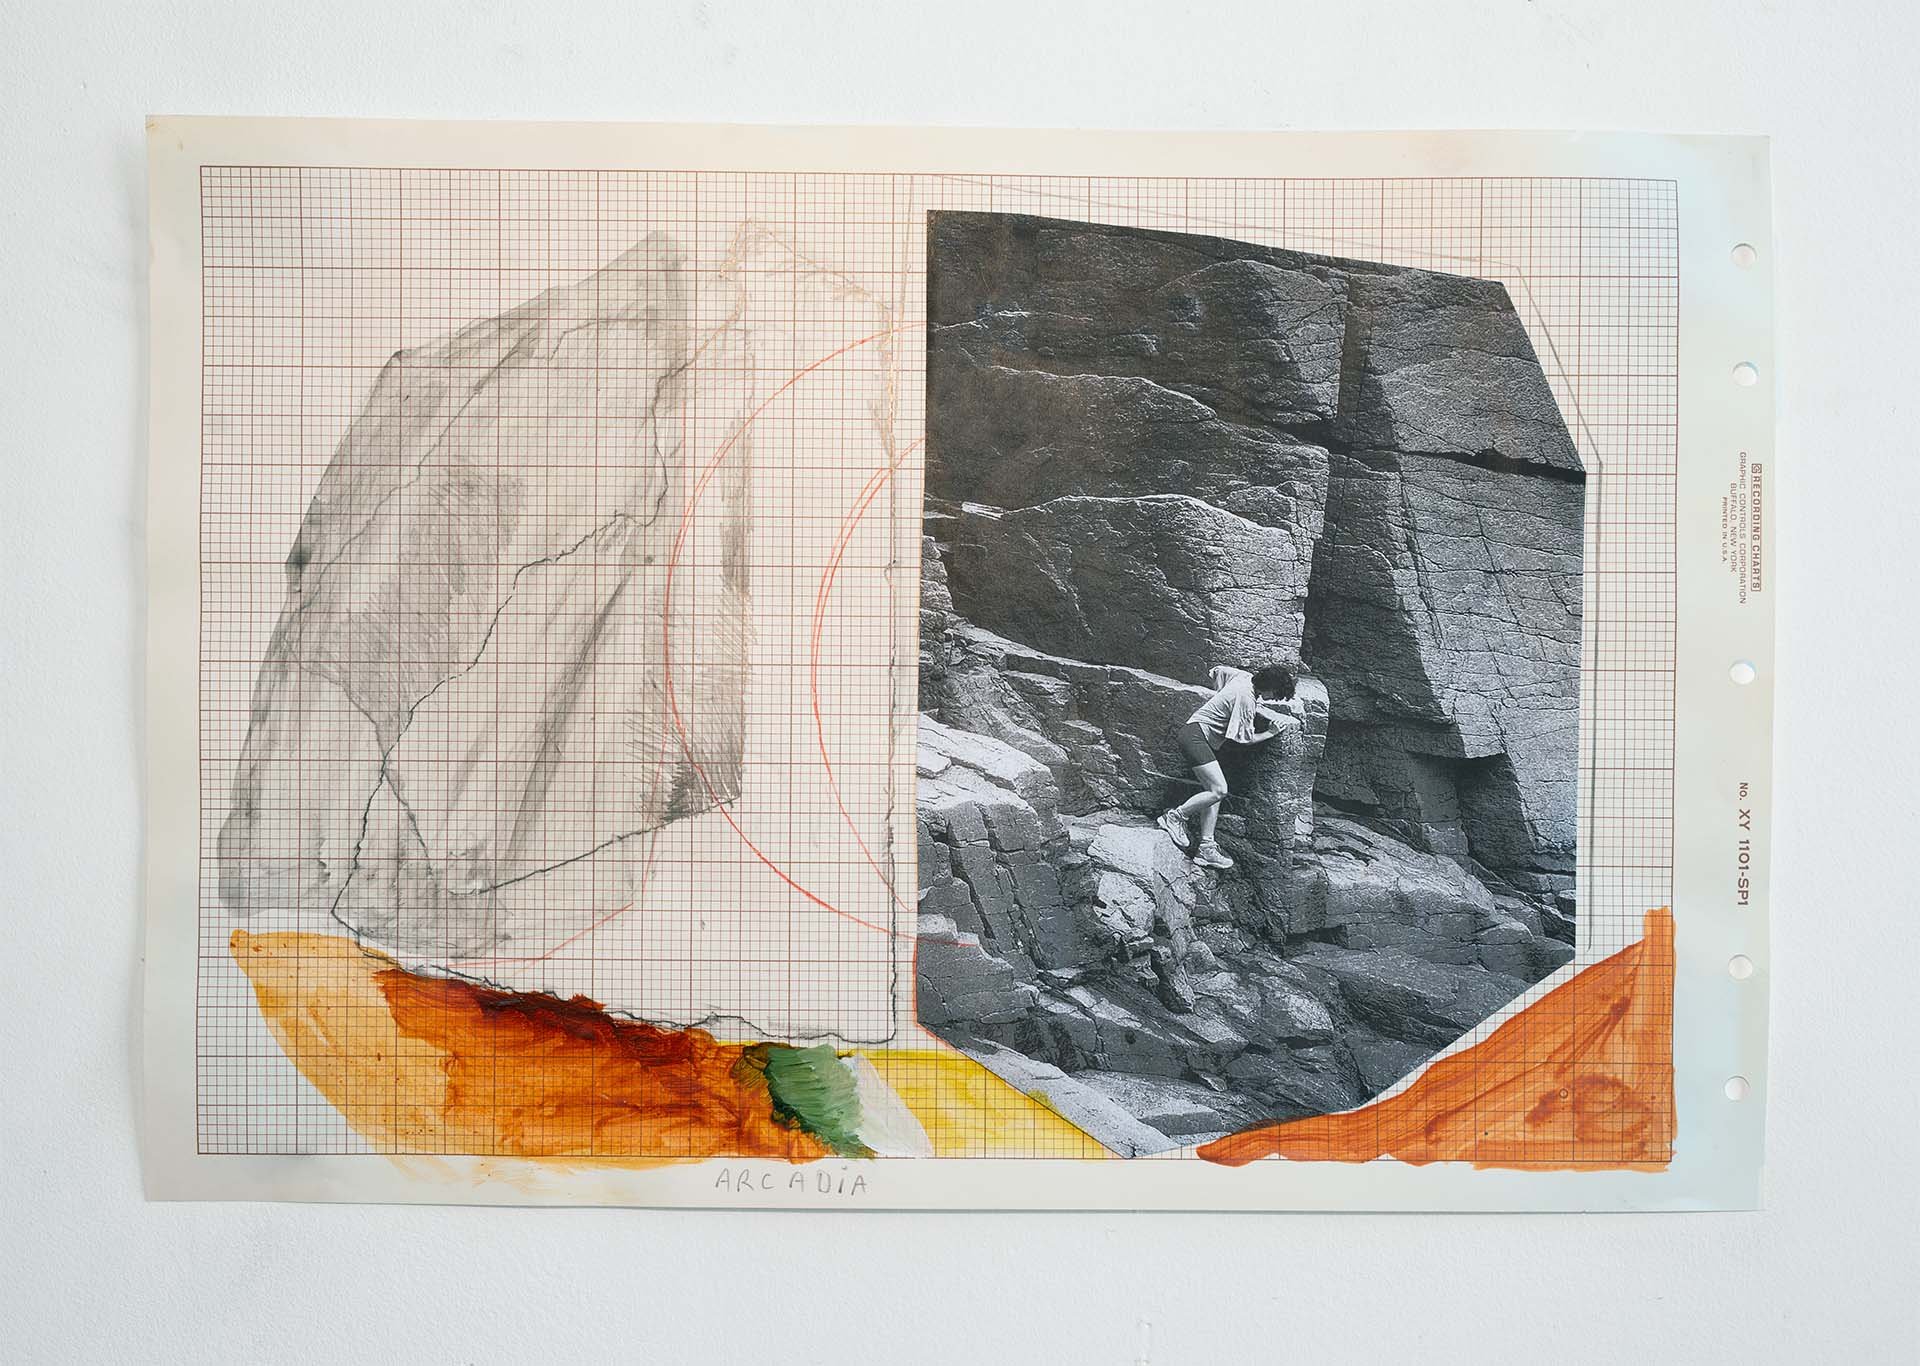  Untitled (arcadia), acrylic, graphite, and collage on plotting paper, 9 x 14 in., 2022 